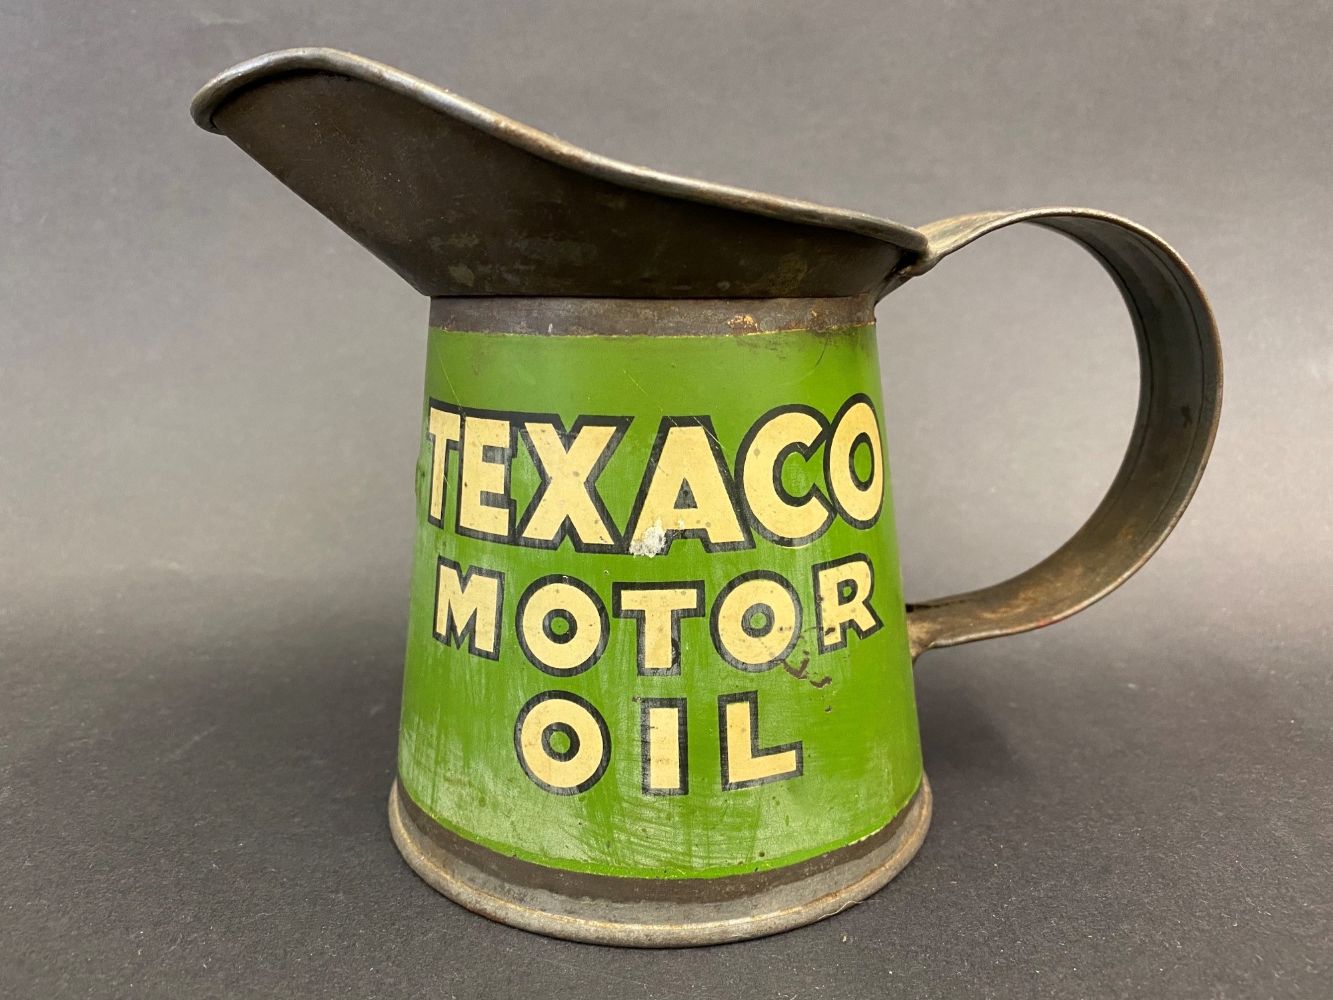 Petroliana and Automobilia - online only sale with appointment viewing available